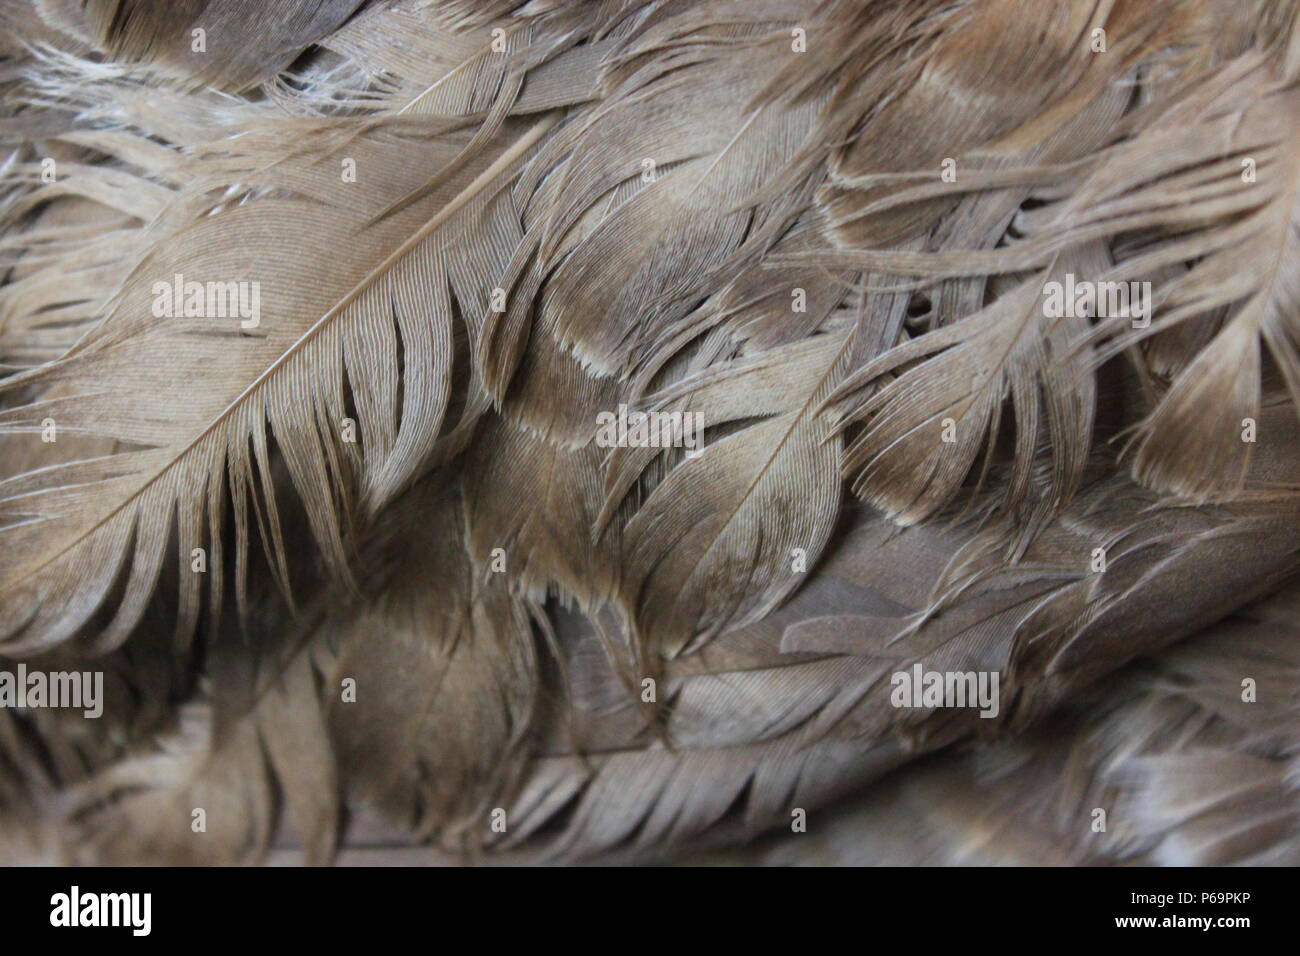 Closeup of brown feathers and plumage of a wild bird Stock Photo